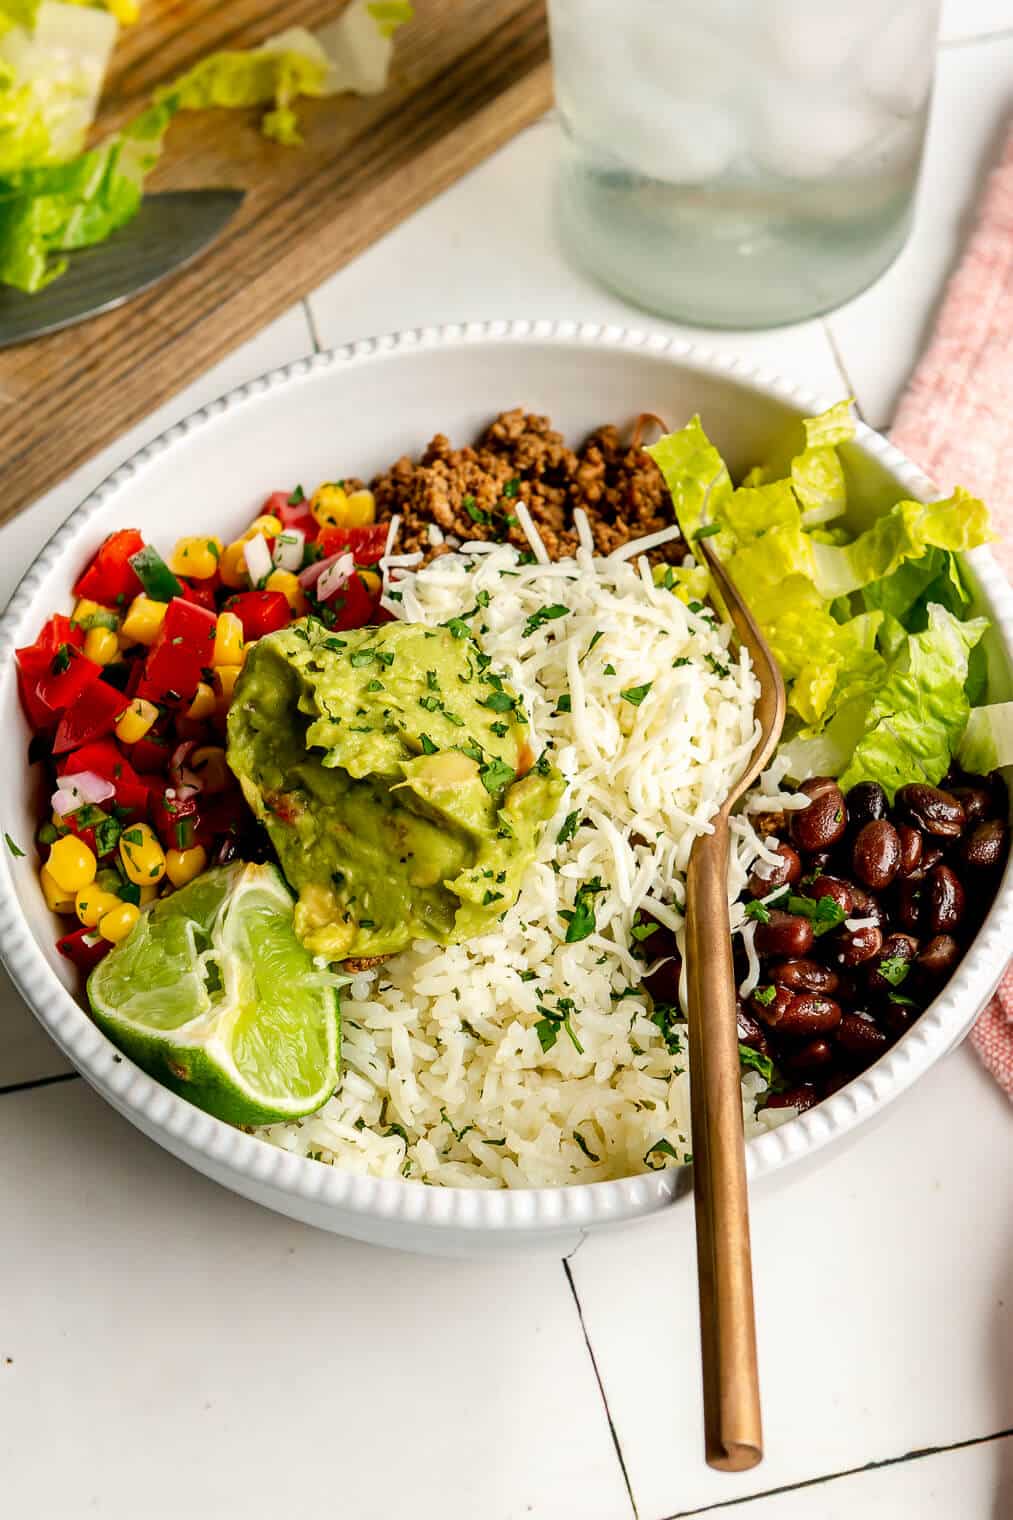 An assembled burrito bowl with rice, beans, peppers, onions, corn, ground beef, lettuce, guacamole, and cheese.